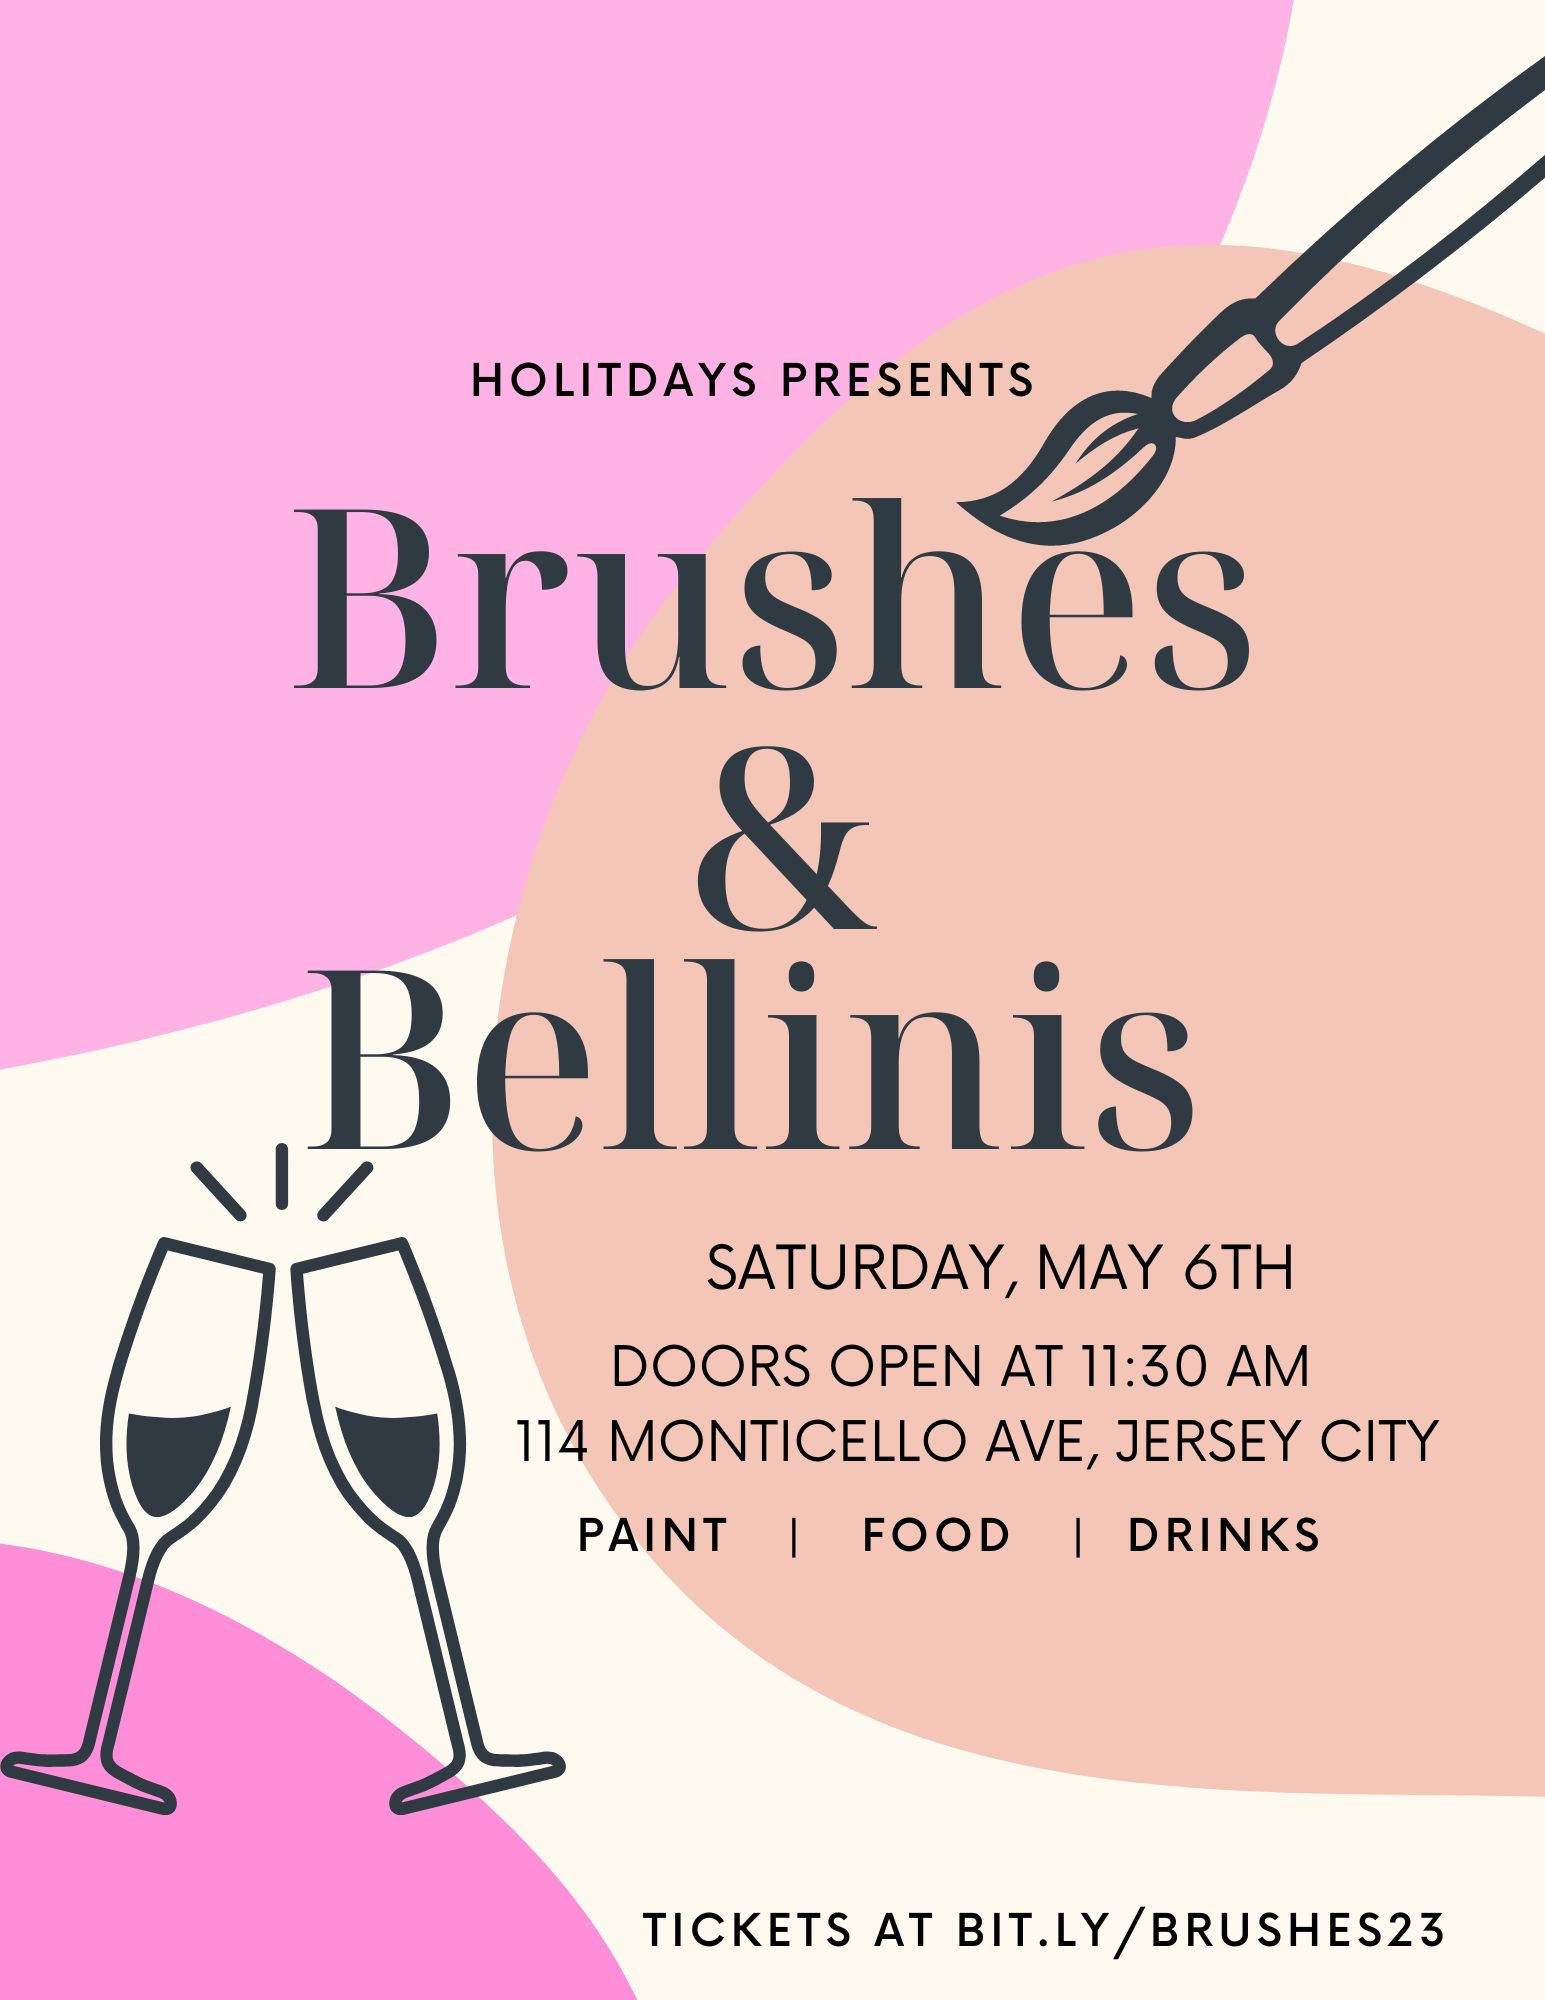 Holitdays presents Brushes & Bellinis Saturday May 6th, doors open at 11:30 am, 114 Monticello Ave, Jersey City